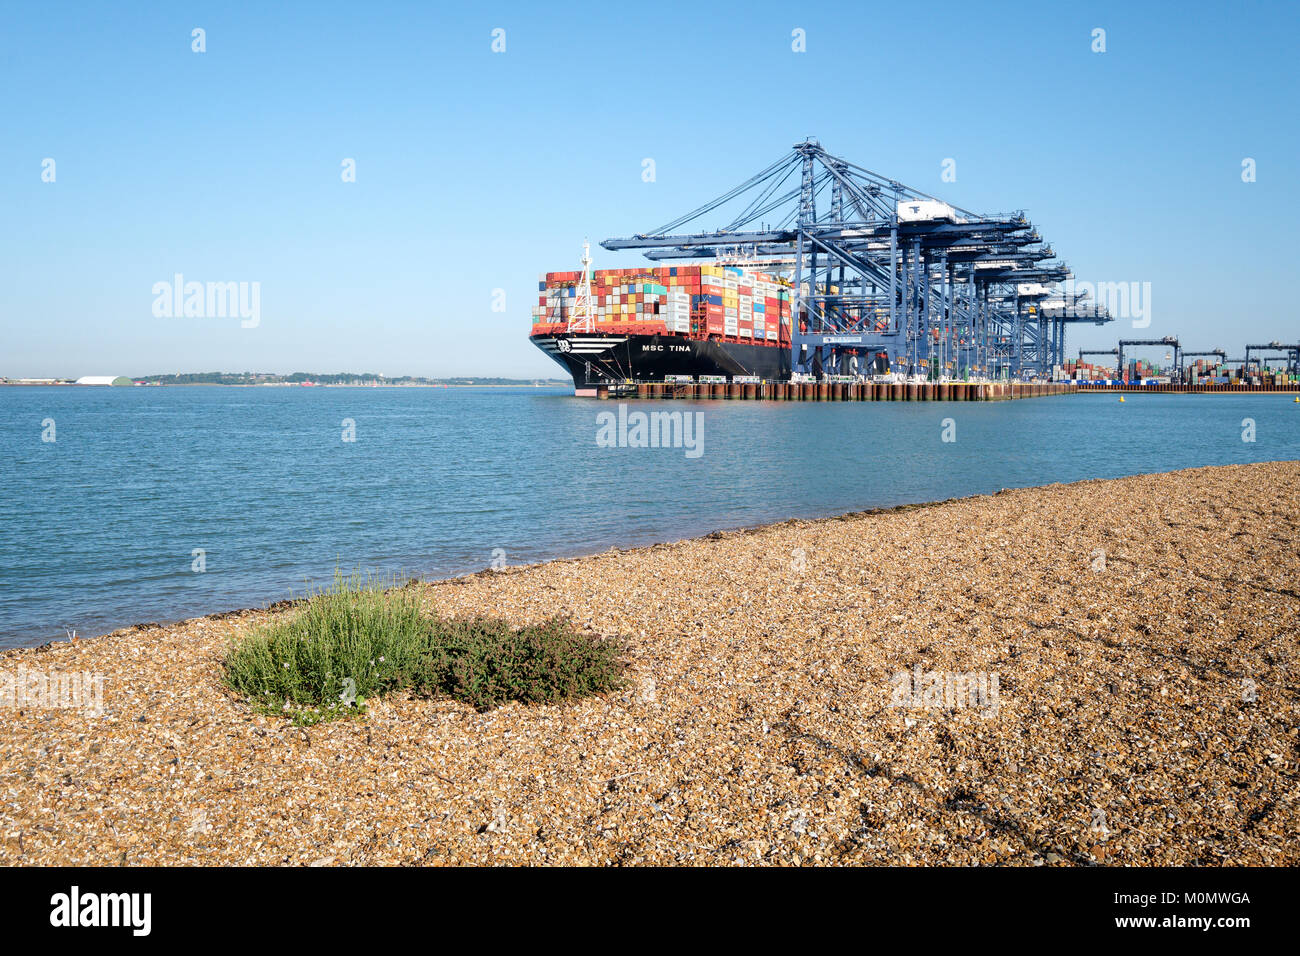 MSC (Mediterranean Shipping Company) container ship MSC Tina  being unloaded in the Port of Felixstowe, England, UK Stock Photo